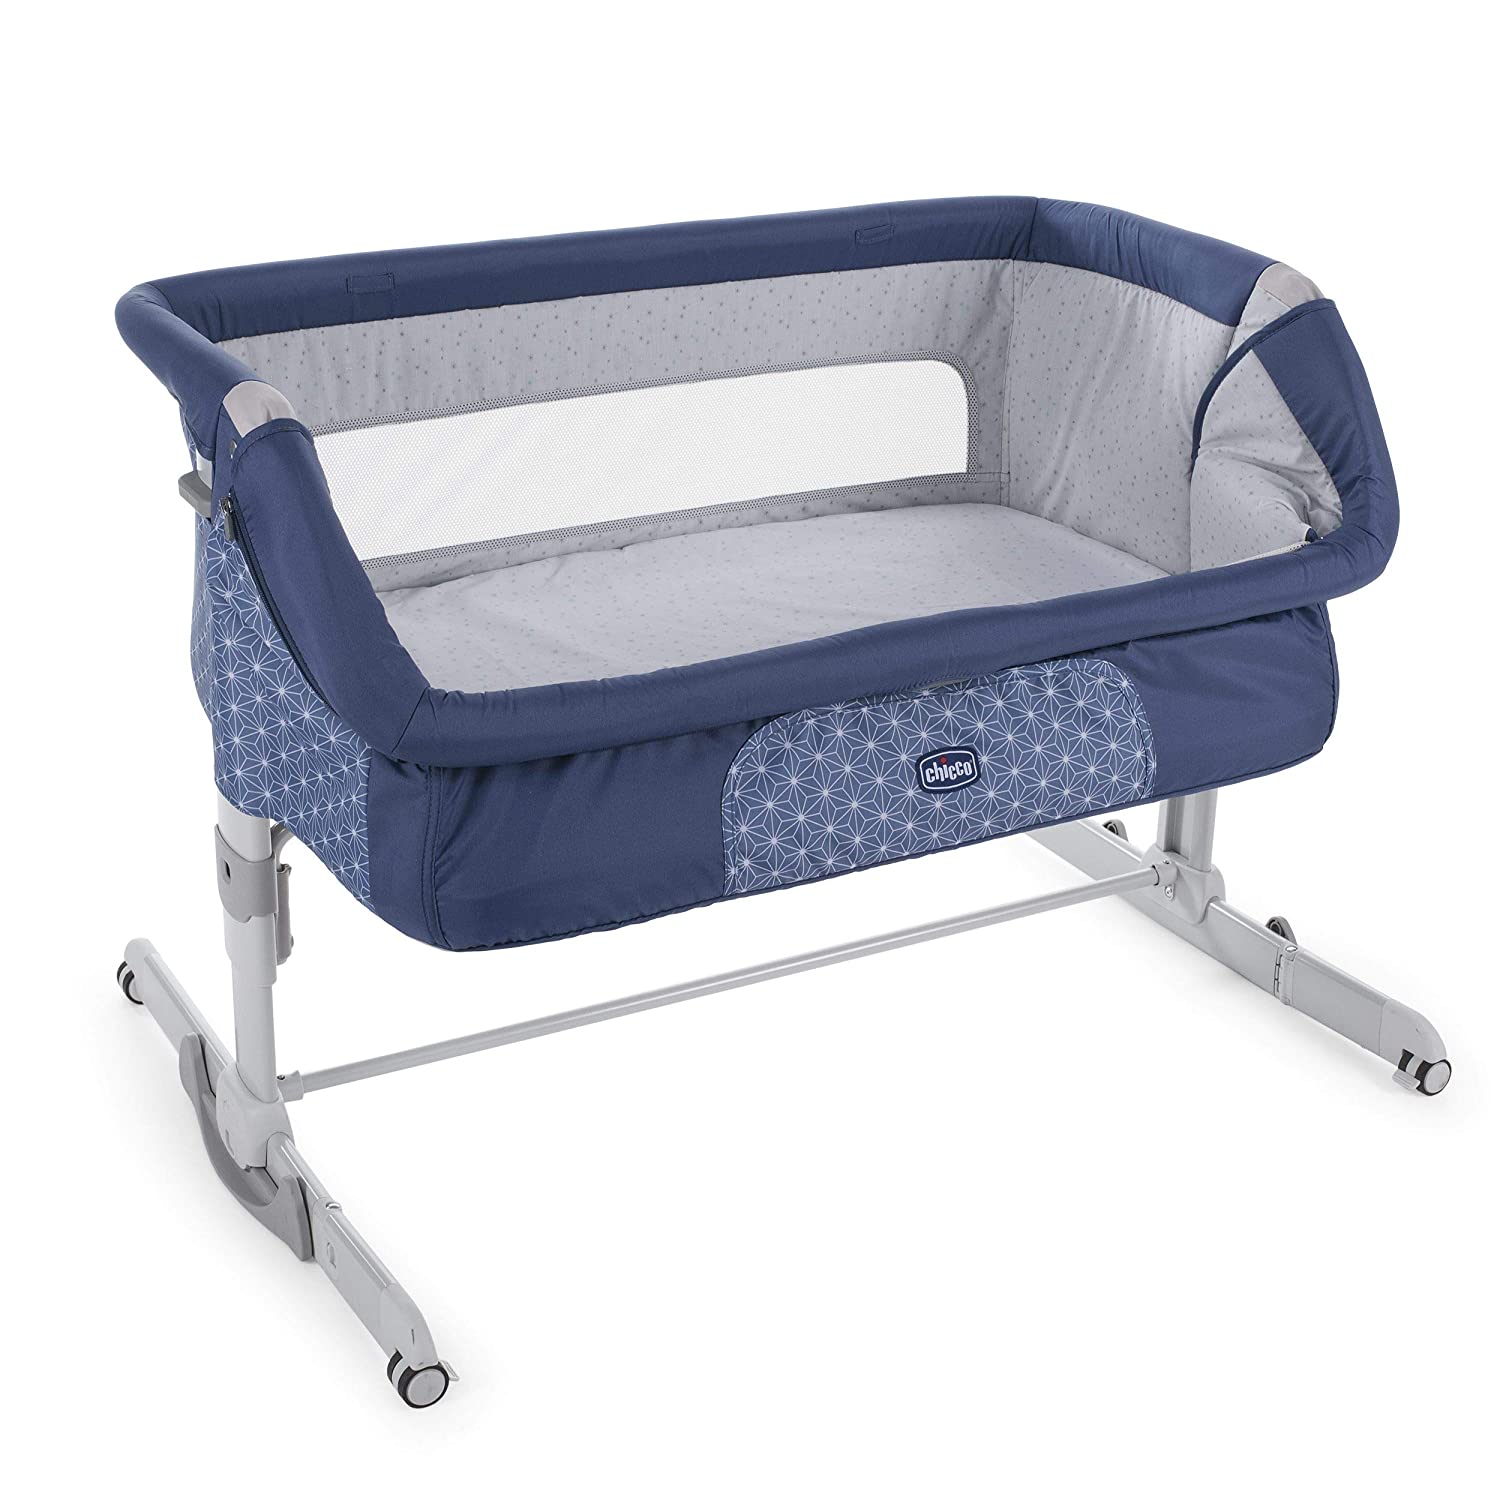 Chicco Baby bed